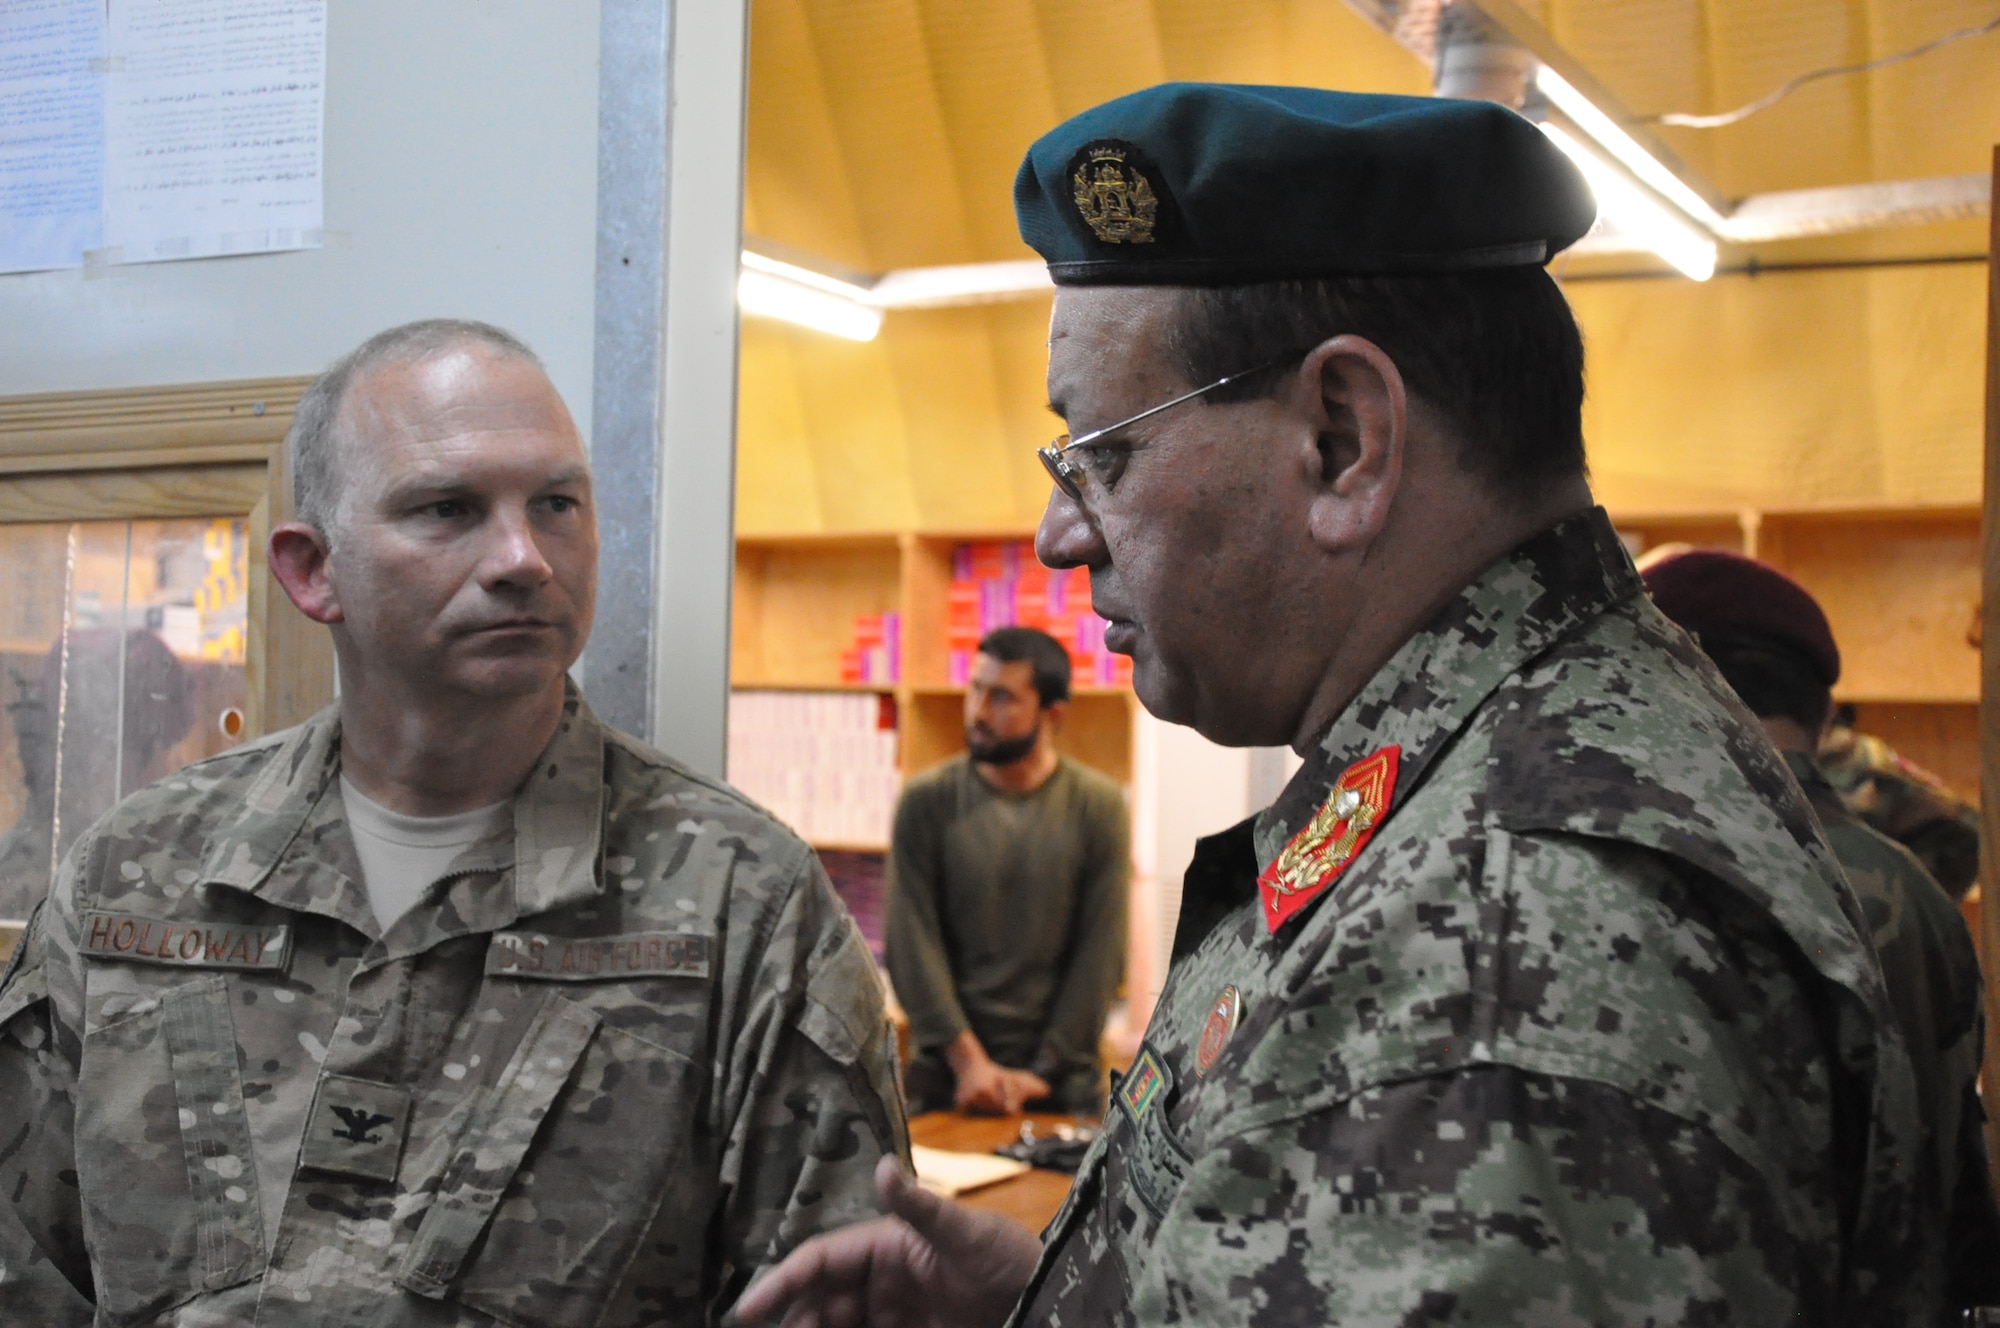 Helmand, Afghanistan (July 25, 2015) - Maj. Gen. Eqbil Ali Afghan Ministry of Defense General Staff, G6, Communications and U.S. Air Force Col. Donald Holloway, Resolute Support Advise and Assist Cell-Southwest team lead, discuss advancements in 215th Corps' field medical care.  